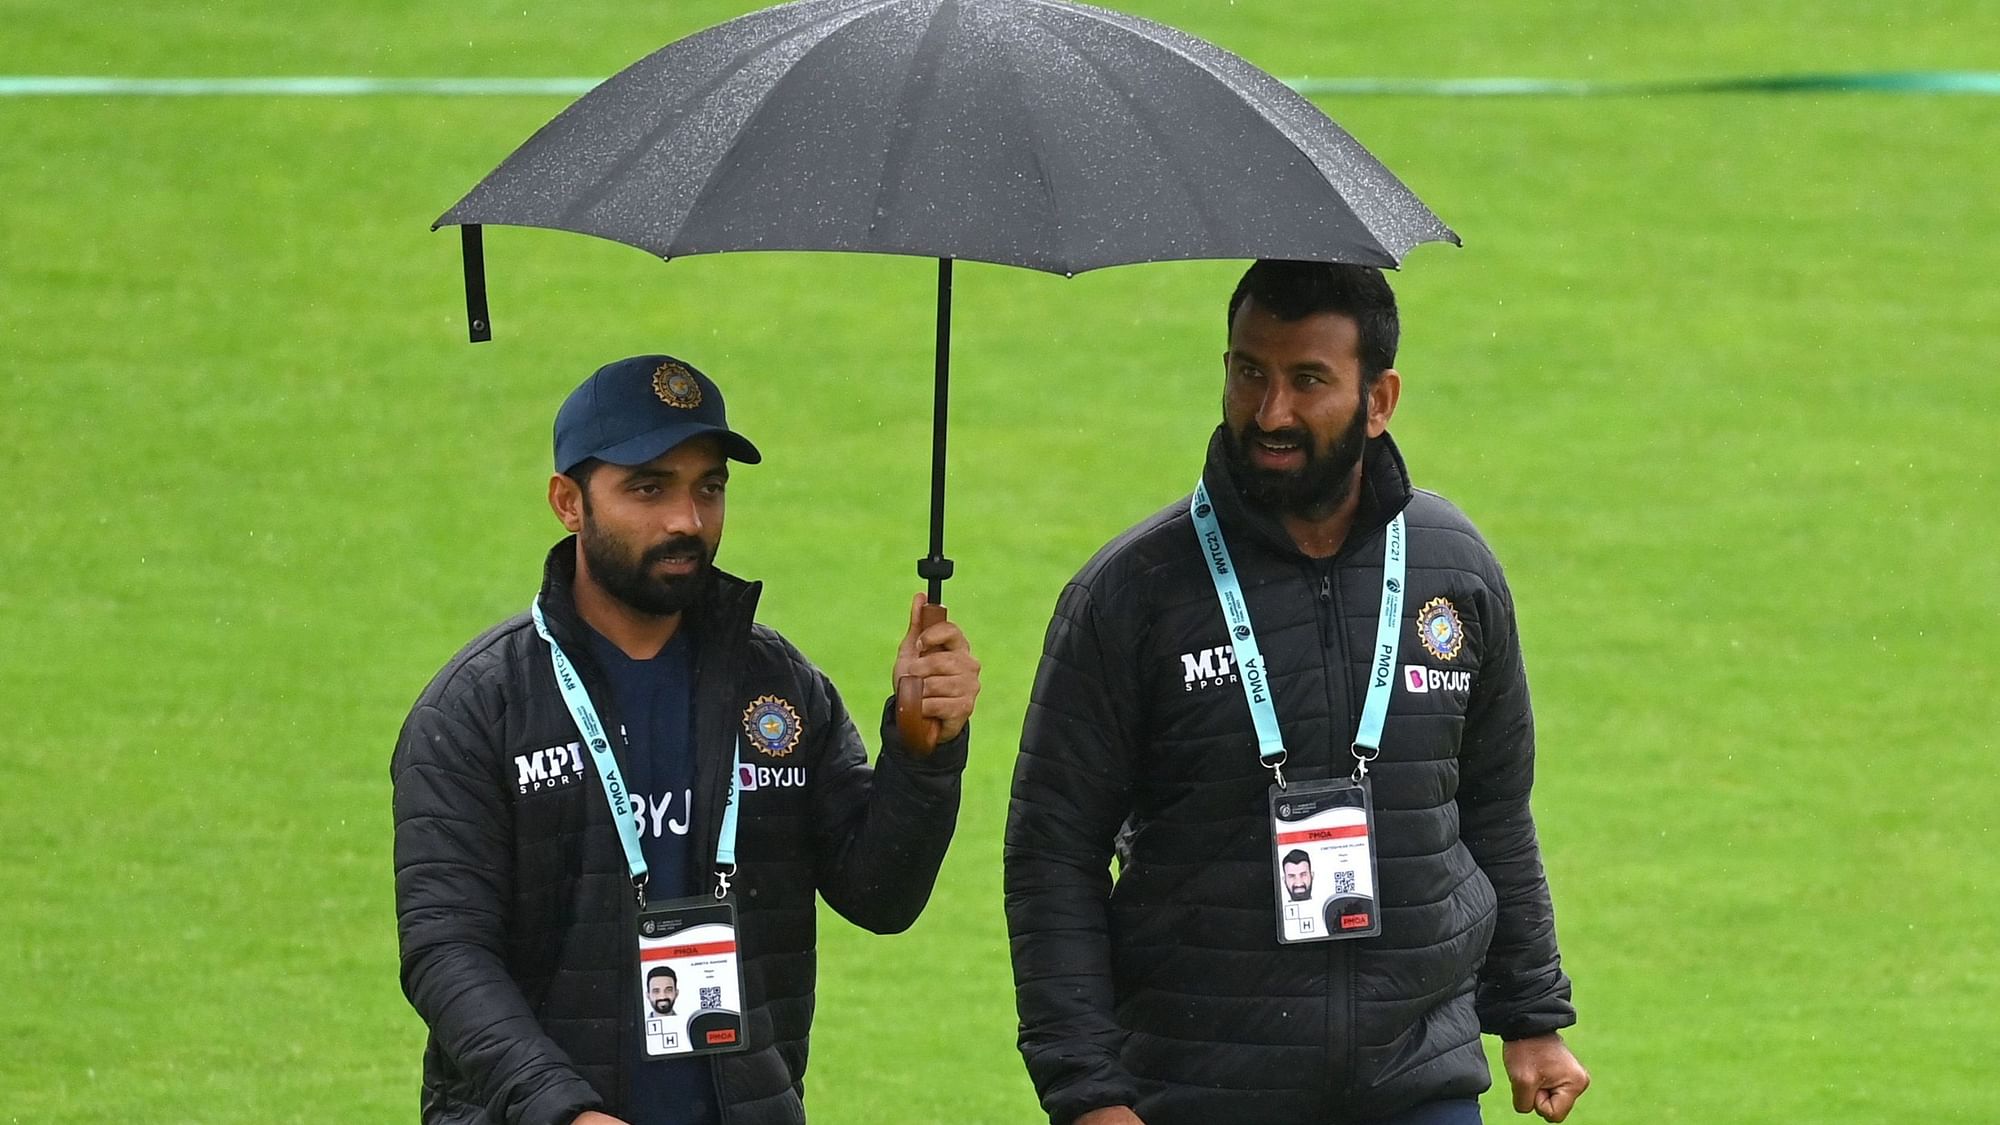 WTC Final: 2 days of the India vs New Zealand World Test Championship final have so far been completely washed out due to rain.